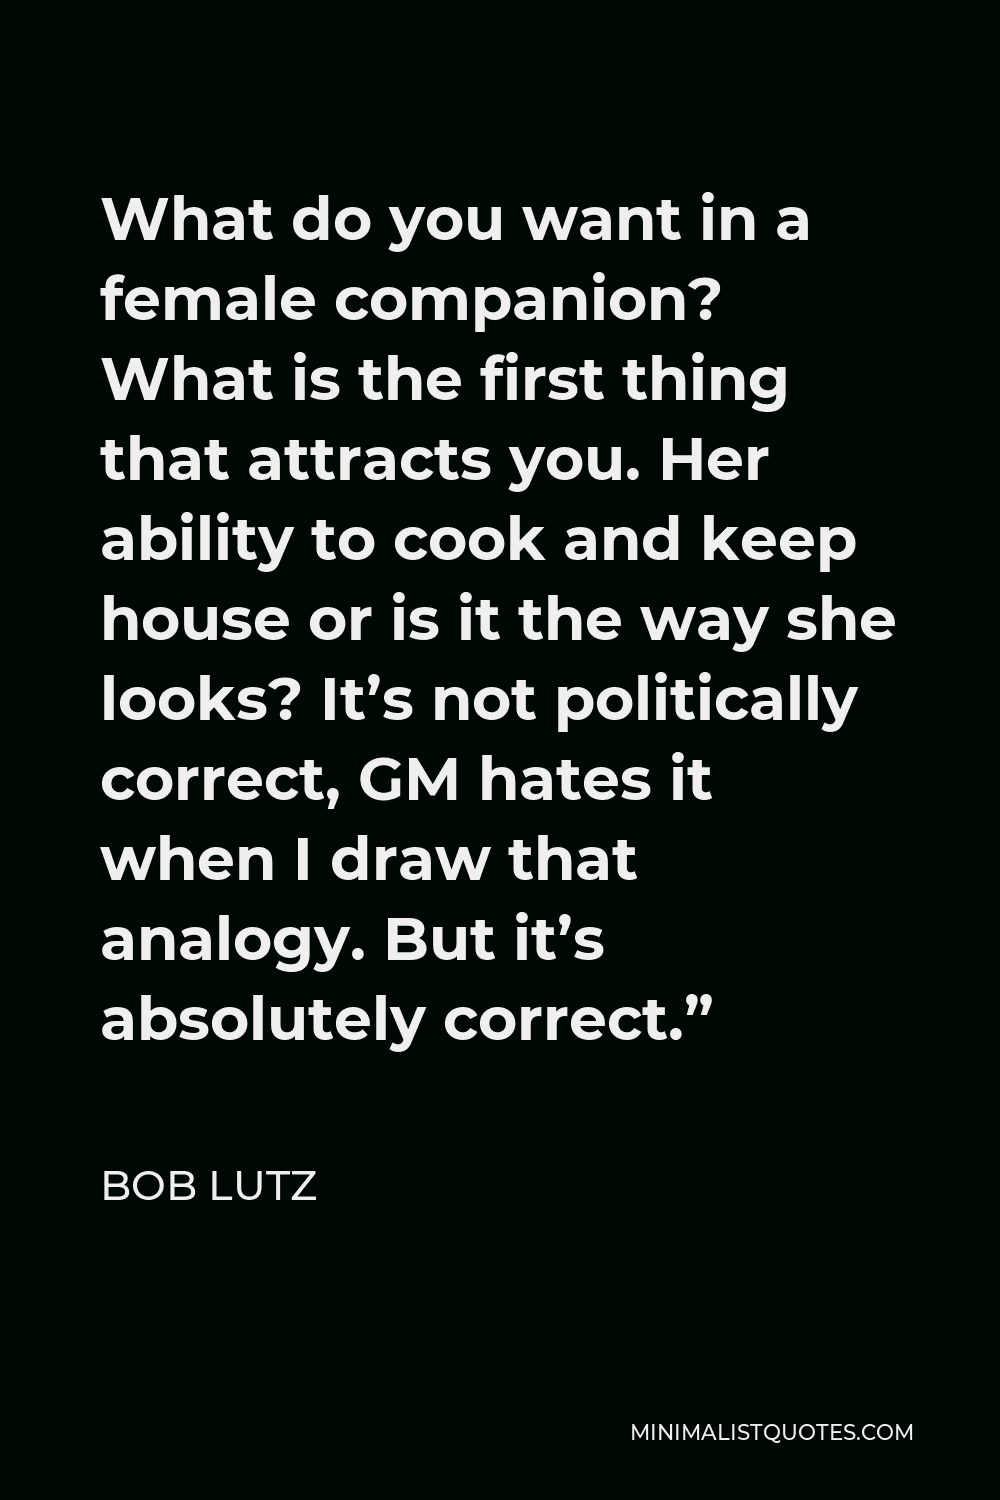 Bob Lutz Quote - What do you want in a female companion? What is the first thing that attracts you. Her ability to cook and keep house or is it the way she looks? It’s not politically correct, GM hates it when I draw that analogy. But it’s absolutely correct.”